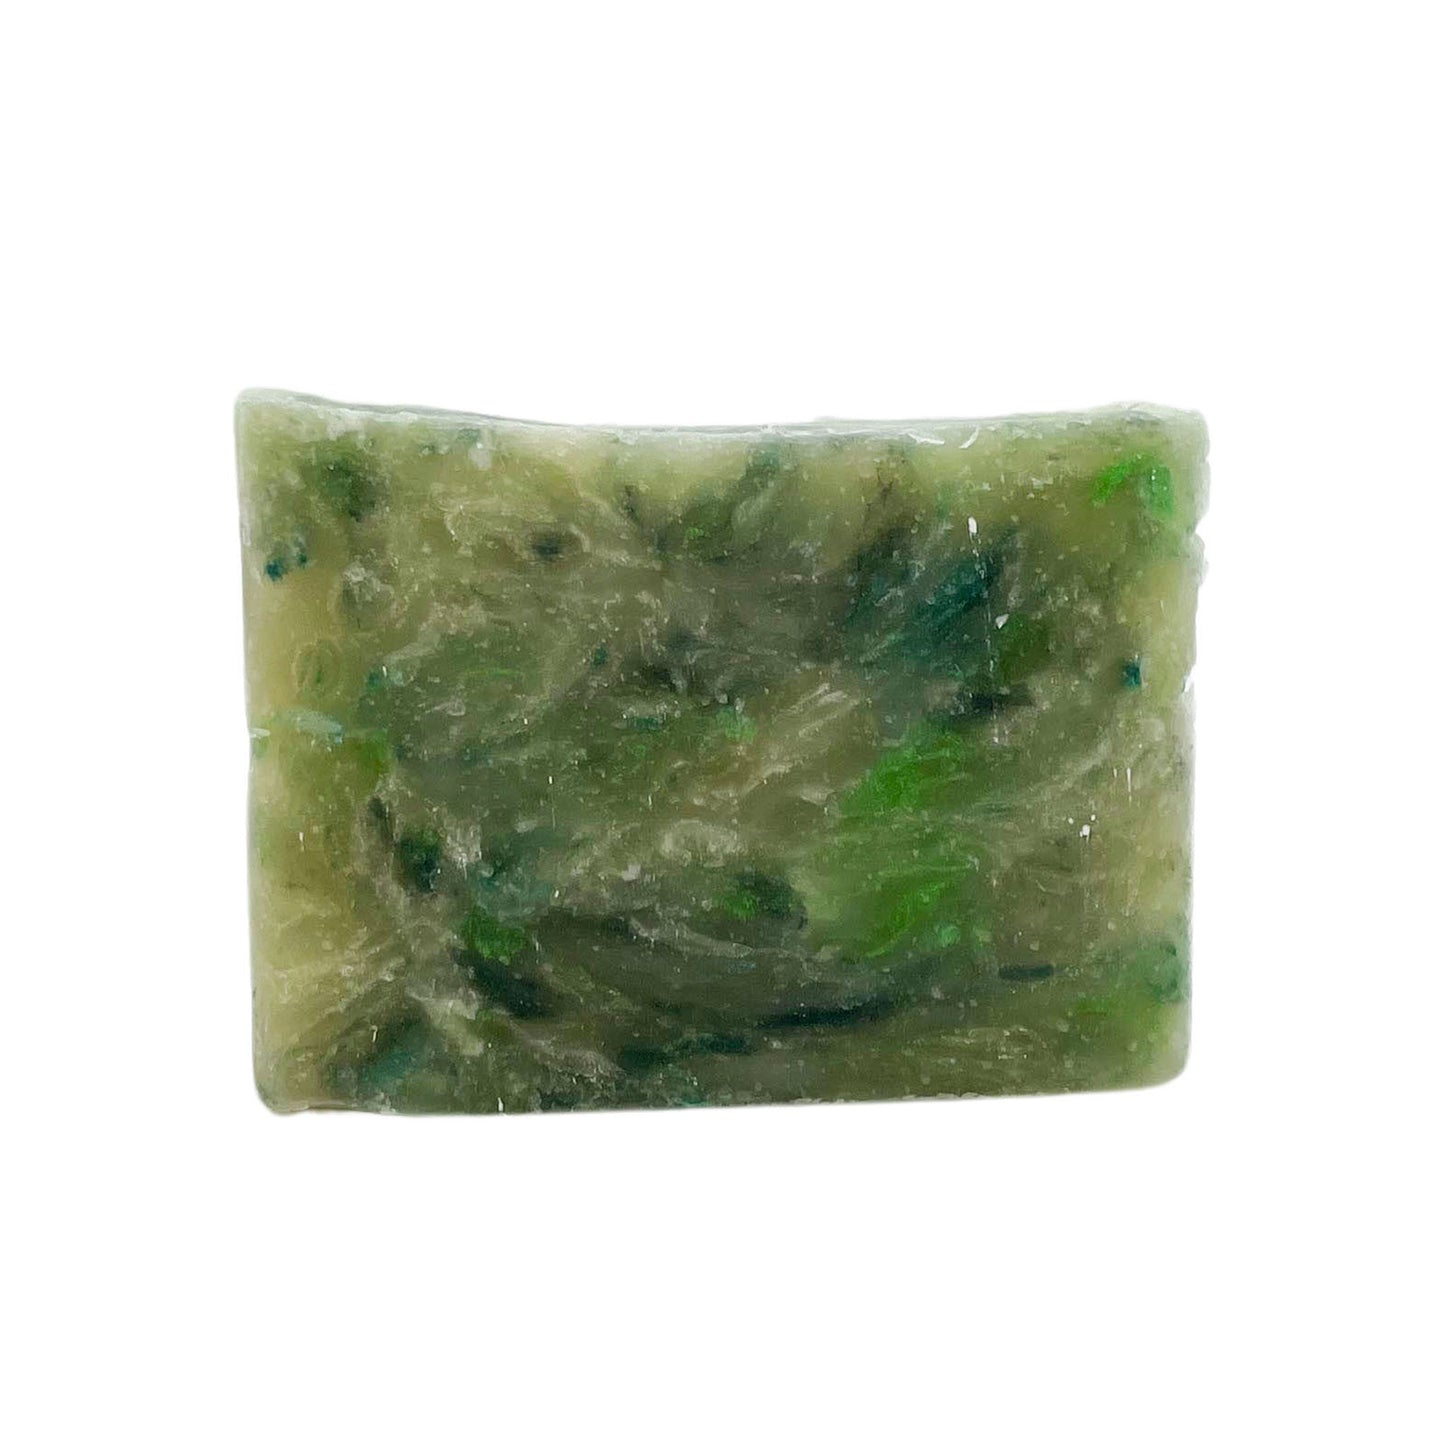 Island Scented Soap at JDNatlady's Creations